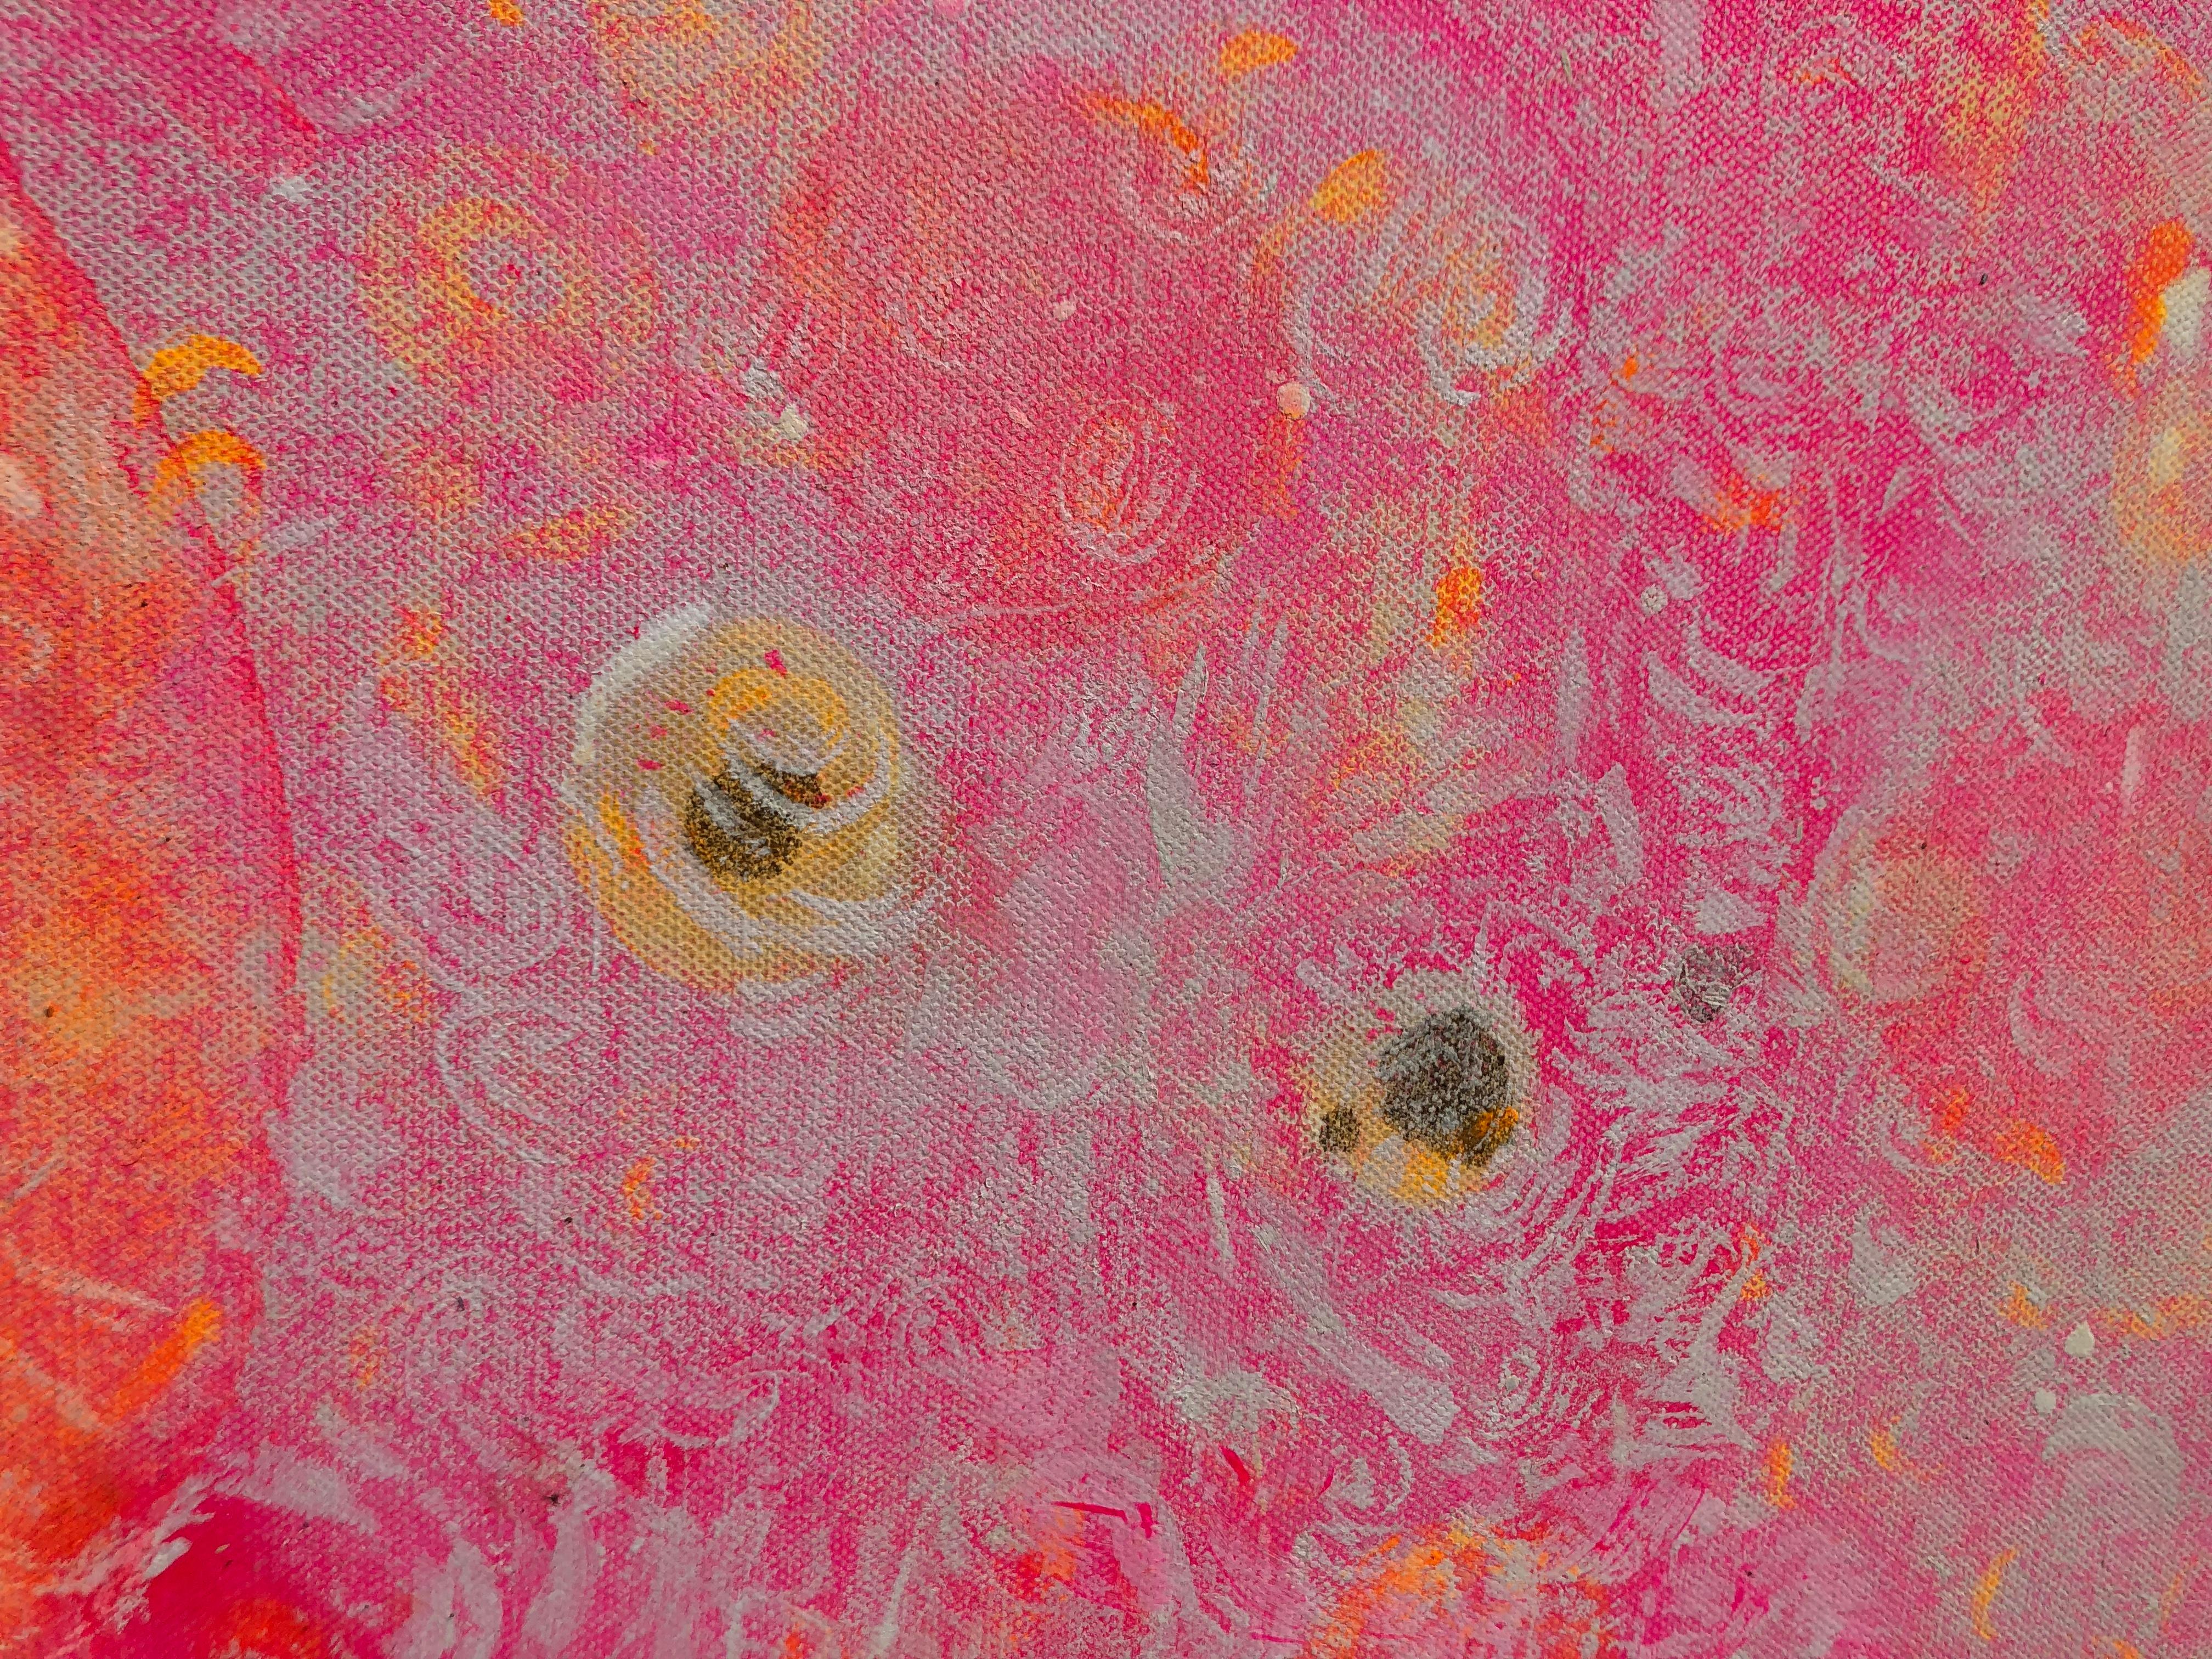 Morning levitation 3 - Painting on canvas, abstract metaphysical, gold, pink For Sale 2